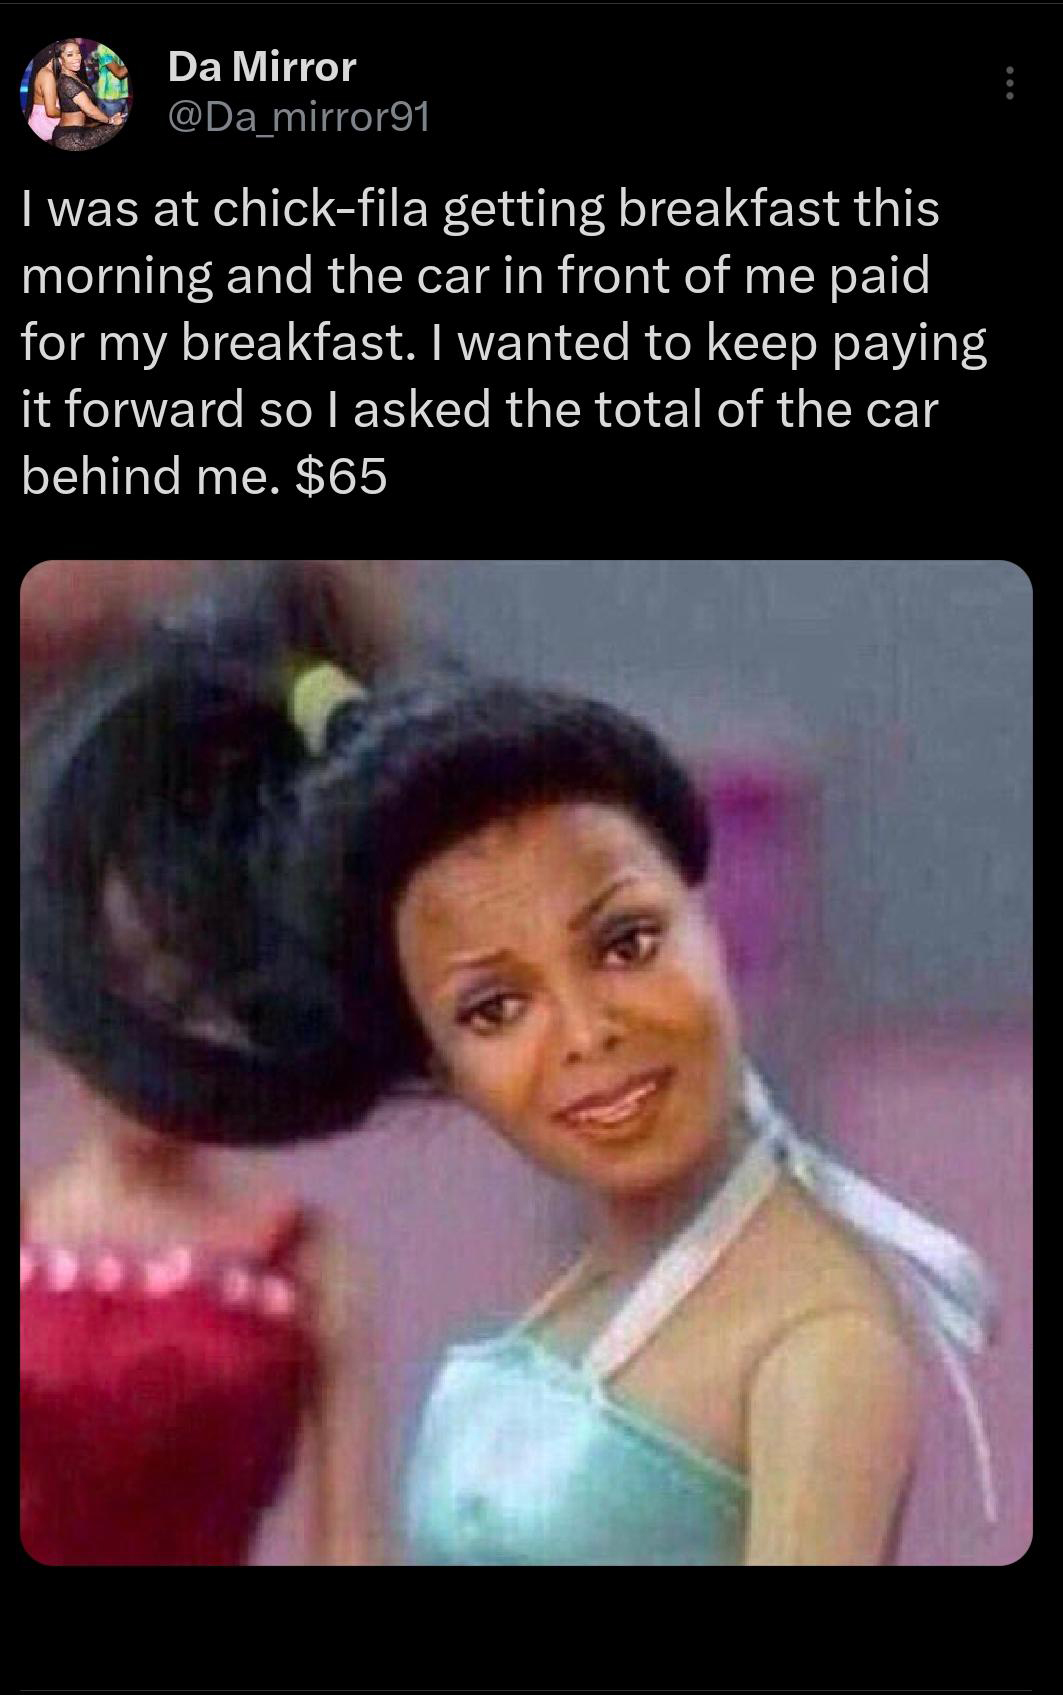 twitter memes - photo caption - Da Mirror mirror91 I was at chickfila getting breakfast this morning and the car in front of me paid for my breakfast. I wanted to keep paying it forward so I asked the total of the car behind me. $65